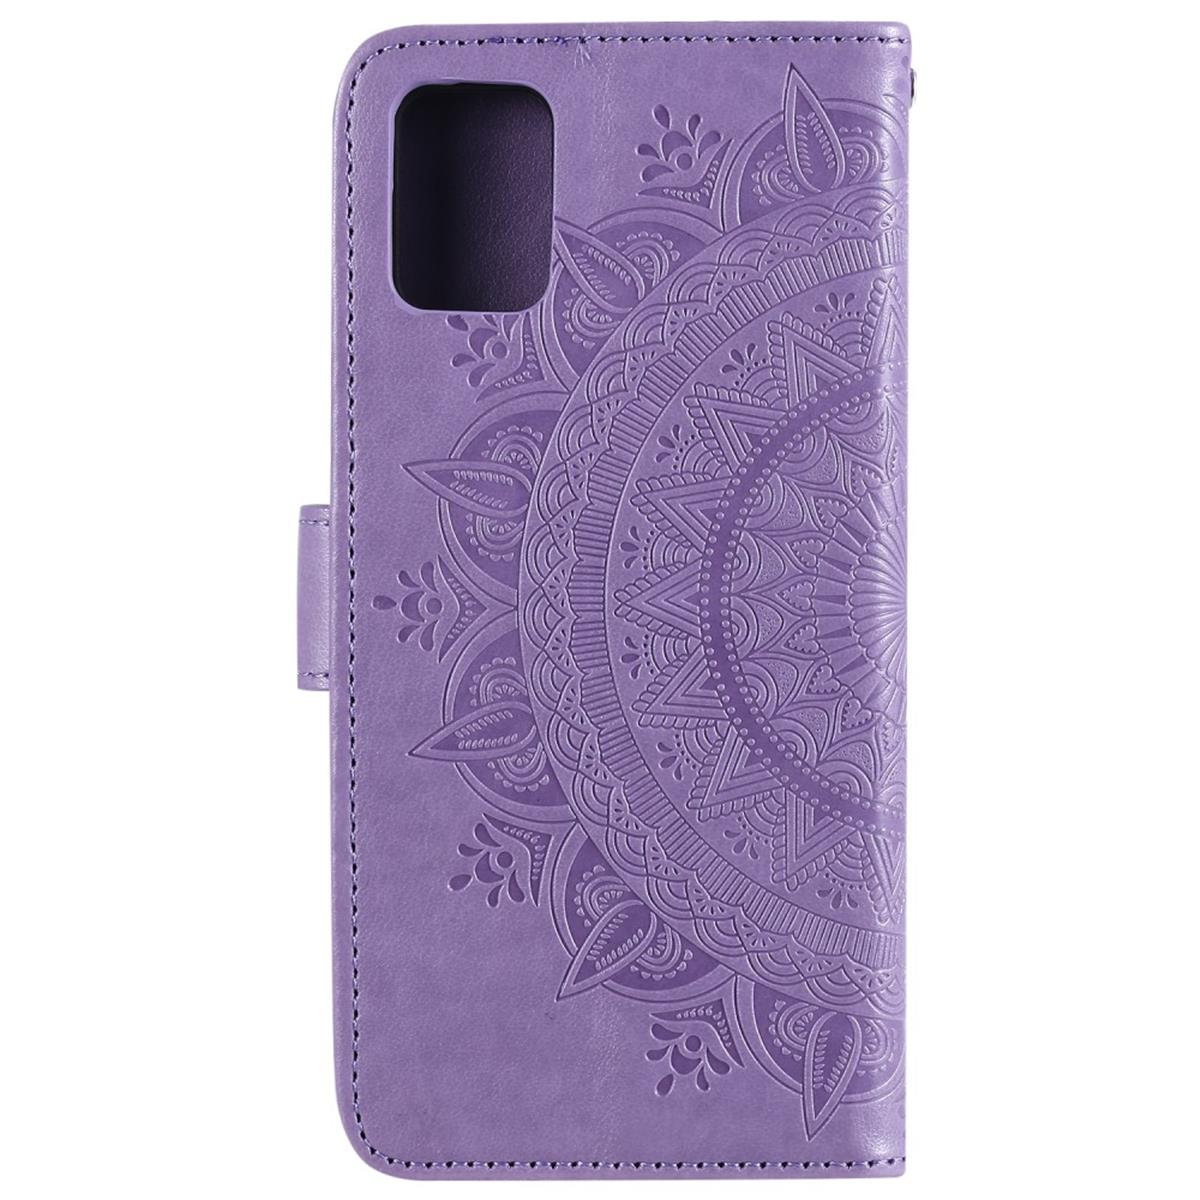 COVERKINGZ Klapphülle mit A31, Muster, Galaxy Mandala Bookcover, Lila Samsung